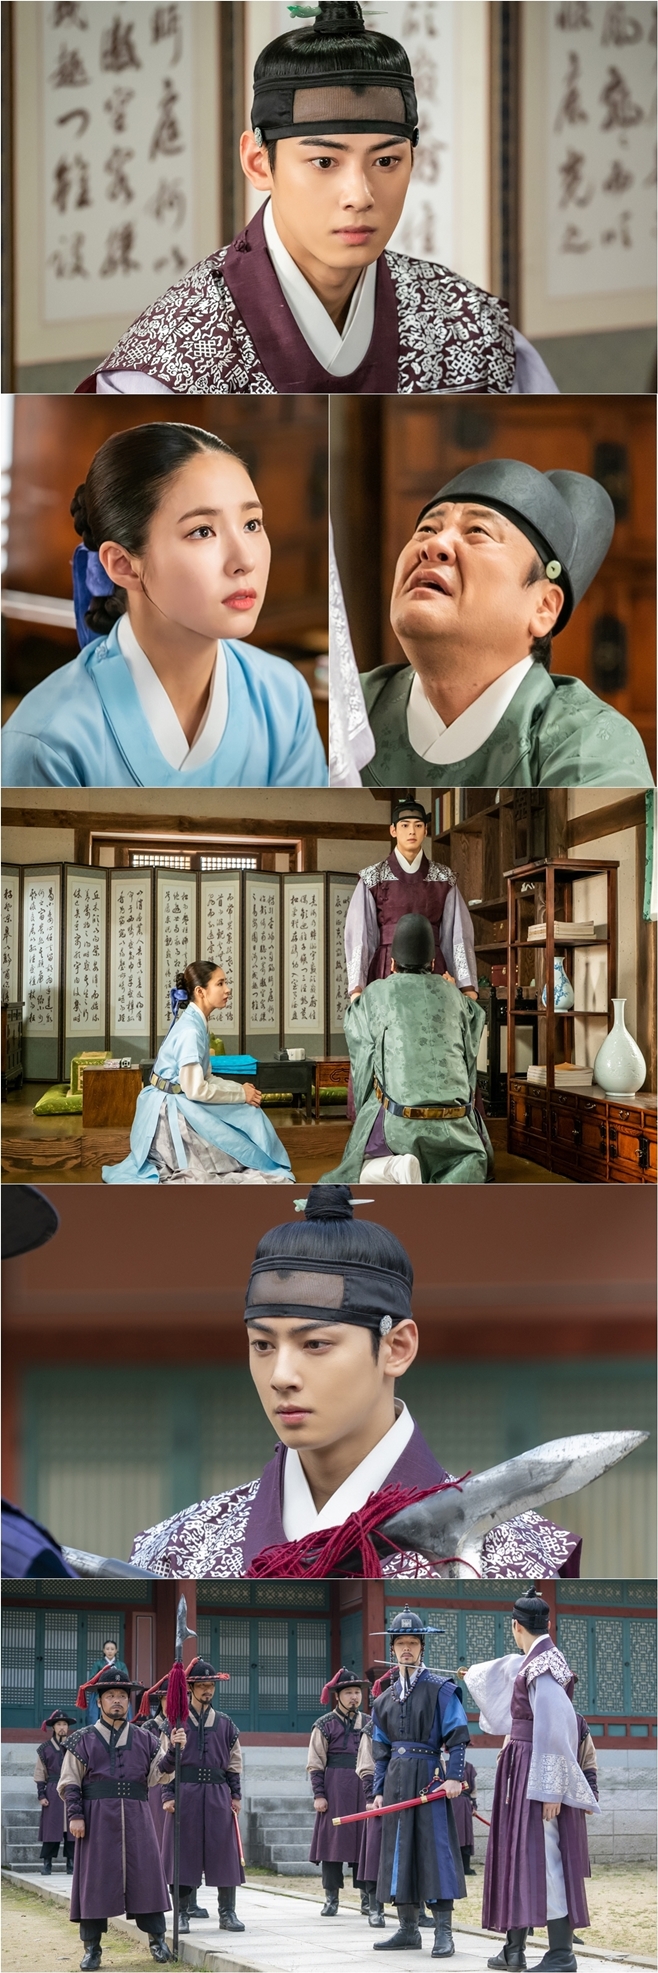 The new officer, Na Hae-ryung, runs into the truth 20 years ago.He not only ignores the dismantling of Shin Se-kyung and the Holy Land, but also shows a charismatic army, such as suppressing the gold army that blocks the front.On the 24th, MBC drama Na Hae-ryung (played by Kim Ho-soo and directed by Kang Il-soo) released the image of Lee Rim (Cha Eun-woo) approaching the truth.Na Hae-ryung, starring Shin Se-kyung Cha Eun-woo Park Ki-woong, is the first problematic first lady (Shin Se-kyung) of Joseon and the Phil full romance annals of Prince Lee Rim with the anti-war mother Solo.Lee Ji-hoon, Park Ji-hyun and other young actors, Kim Yeo-jin Kim Min-sang, Choi Duk-moon,In the 33-36th episode of the new employee, Na Hae-ryung, Lee Lim was shown to be the enemy of Lee Kyum (Yoon Jong-hoon) of the Hwangju Heeyoung County.It was also surprising that Lee was a teacher in the Hodam Teacher, which is the center of all the events.Na Hae-ryung and Irim discovered the link between Kim Il-moks Sacho and Nokseodang, which contain all the truths of the incident 20 years ago, and approached the truth and raised interest in future development.Na Hae-ryung in the public photo is looking at Lee Rim with a firm eye, which is a situation where Lee Rim decided to visit Kim Yeo-jin and ask for the truth.In this regard, Heo Sam-bo (Seongji-ru) of the inner circle holds Lees leg and begs me to not go to the preparations, while Lees face is turning away from him, which makes him sad.Then, while Na Hae-ryung and Sambo were heading for the preparations, Irim was restrained by the gold army.Soon, Irim is pointing at the swords without hesitation toward the gold soldiers who stop him, and he is pouring charisma that can not be tolerated.As such, Lee Lim is foreseeing that he will run into the past 20 years ago as the enemy of the King Hee Young-gun, and the truth will be revealed and what kind of blue will happen.It airs at 8:55 p.m. on the 25th.